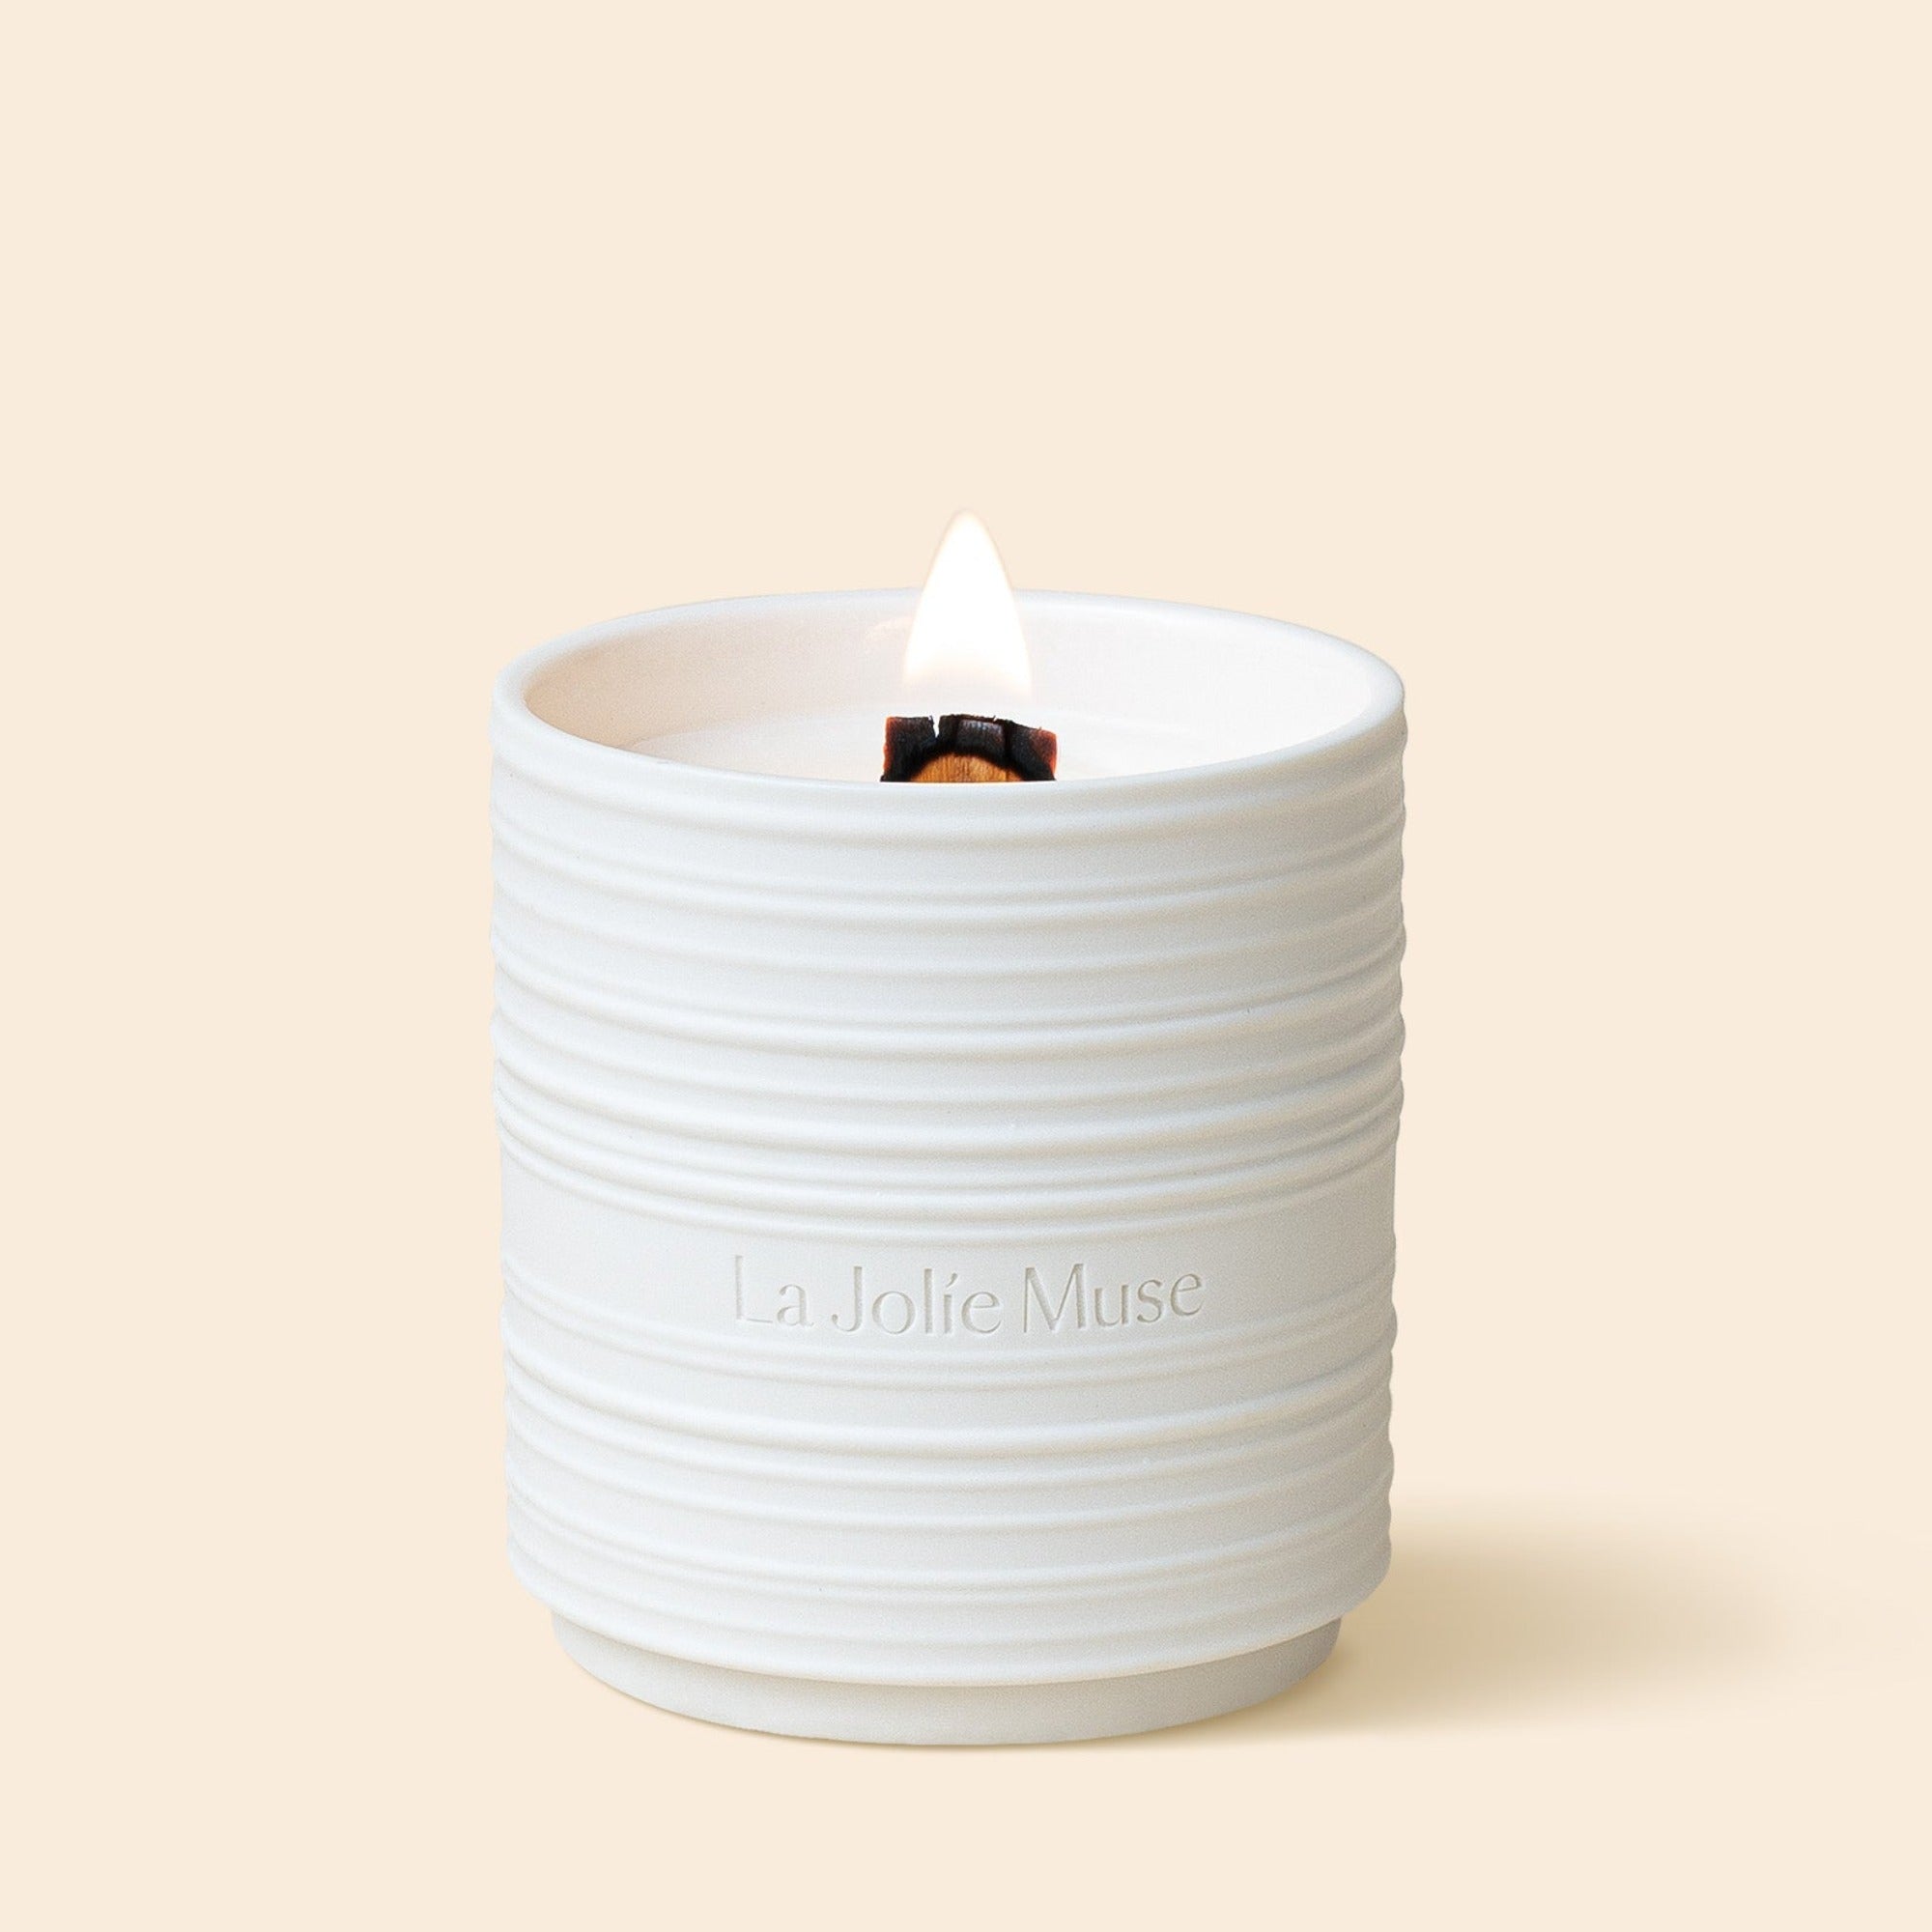 Product Shot of Lucienne - Geranium Vert Mint 8oz candle in the middle